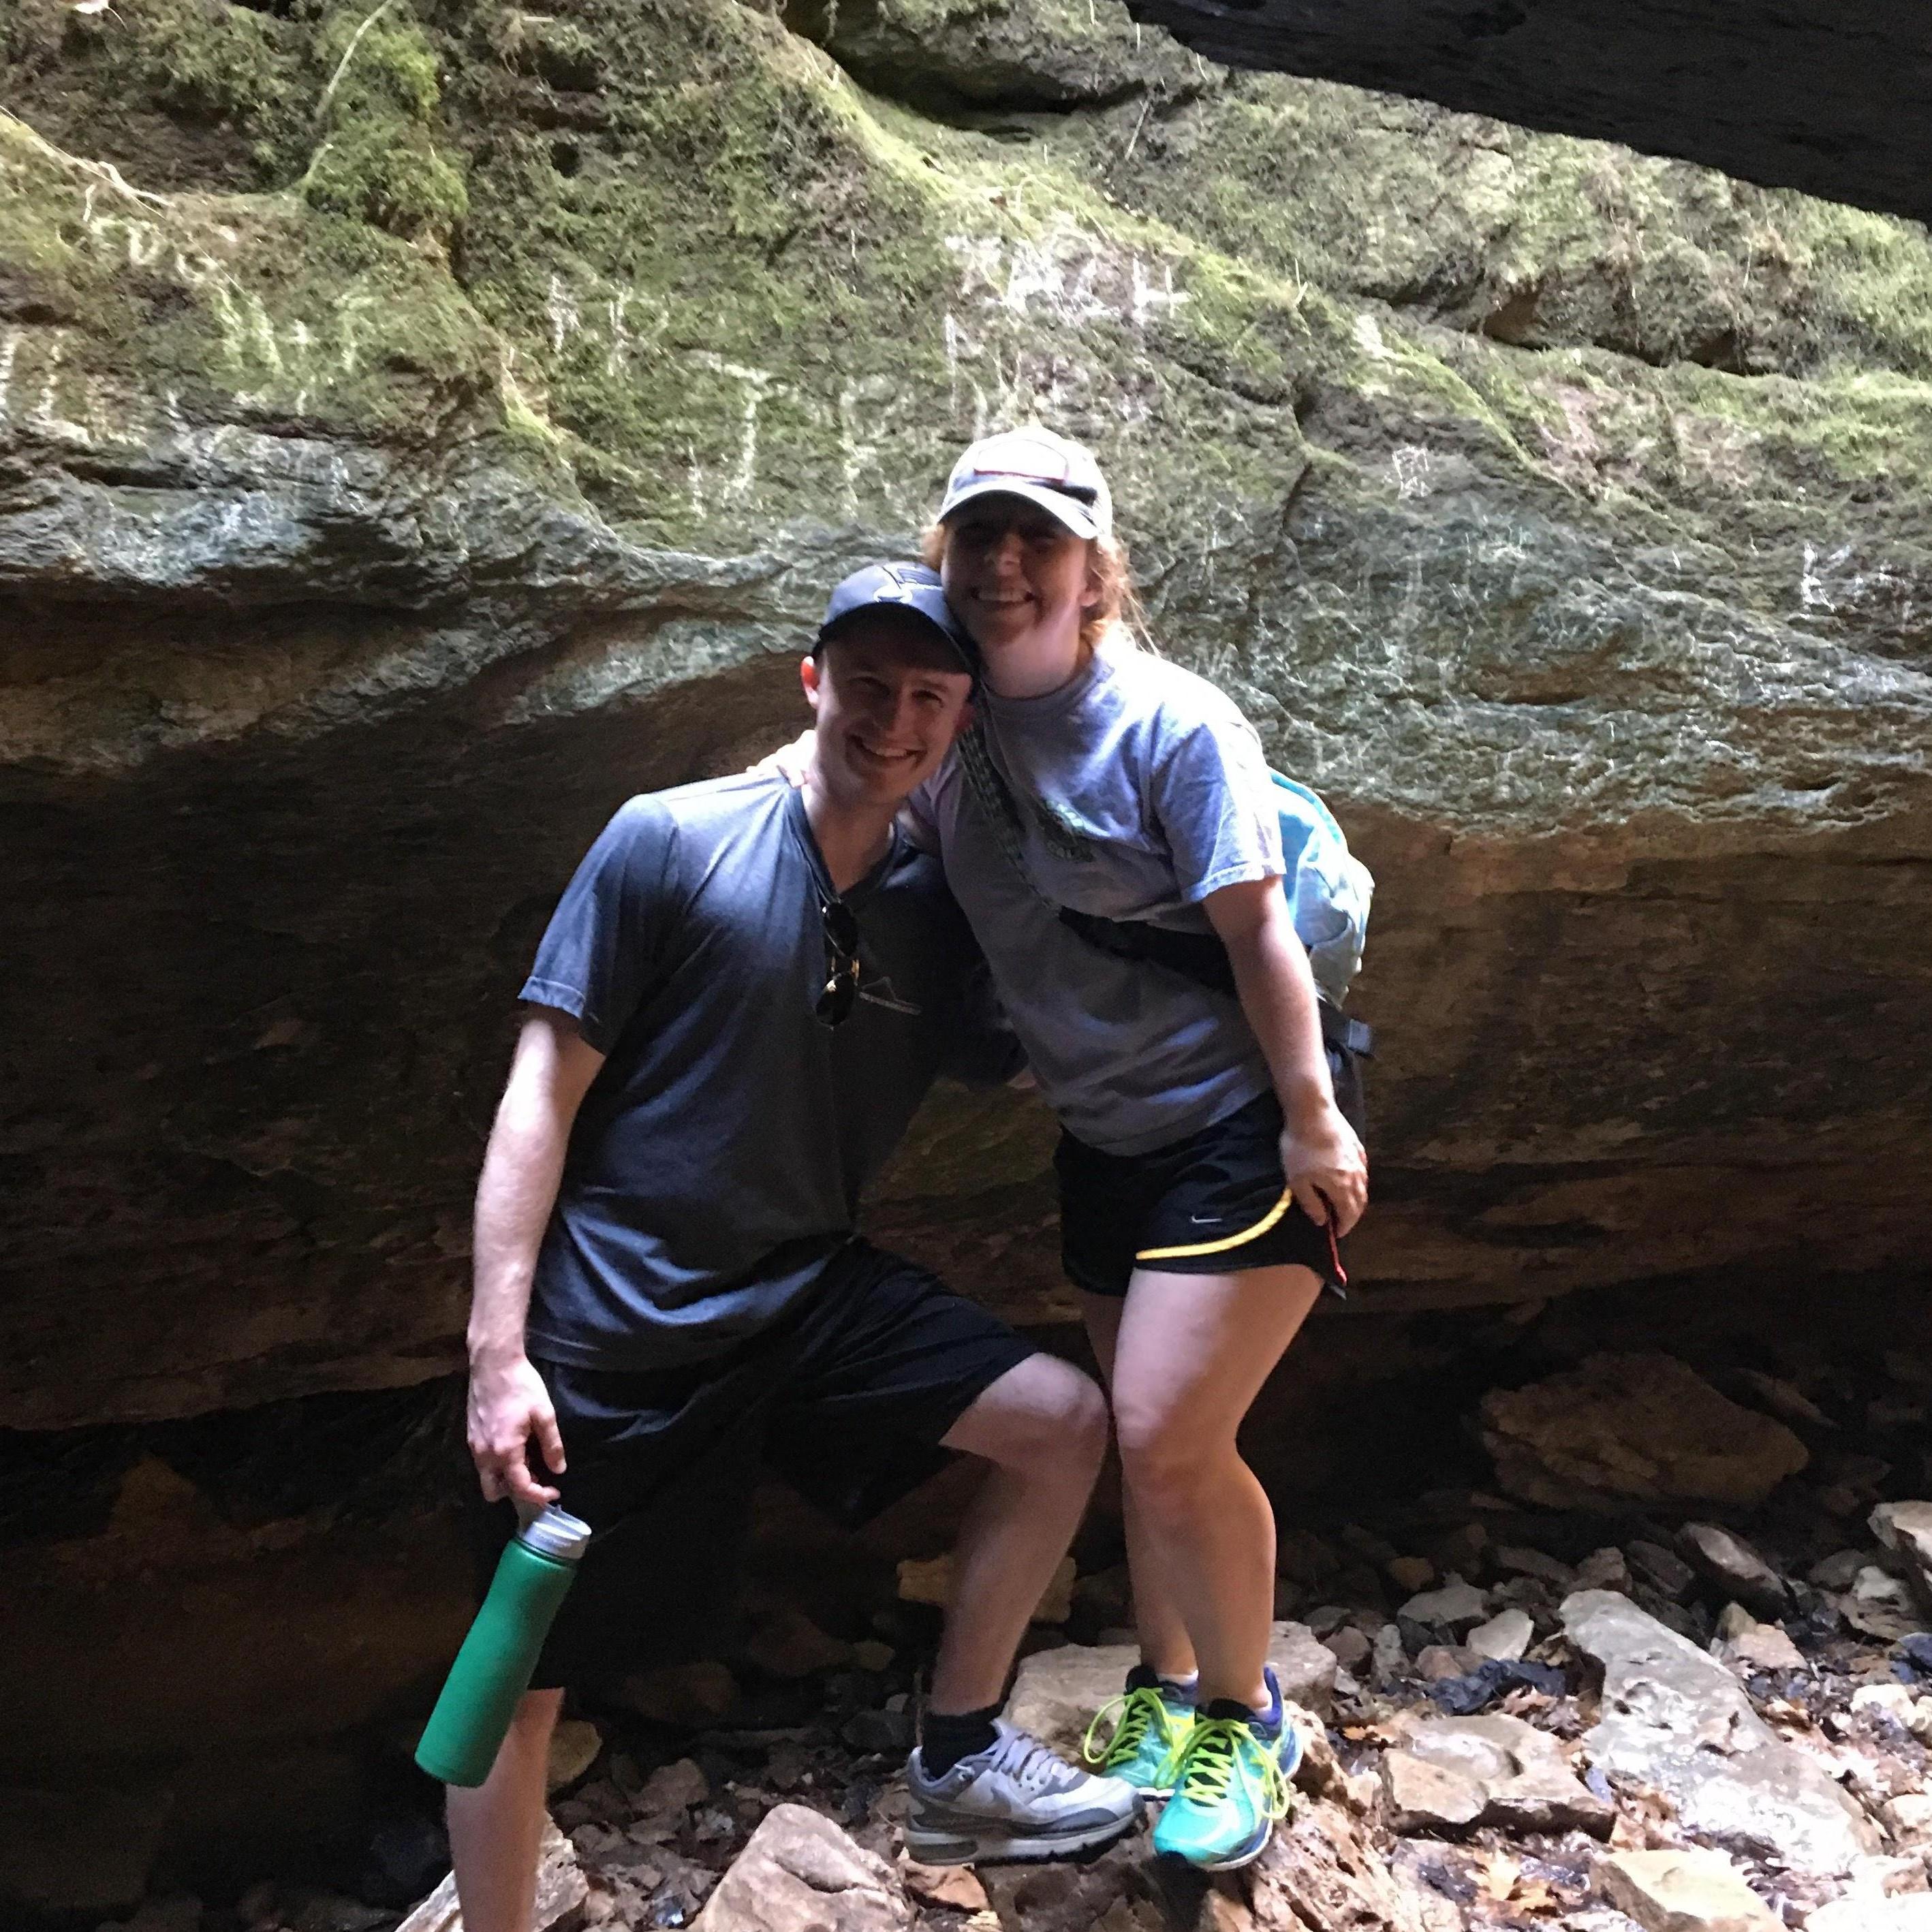 Our first photo together, during one of our many dates early on. Here we are hiking at Devil's Icebox in Rock Bridge State Park.